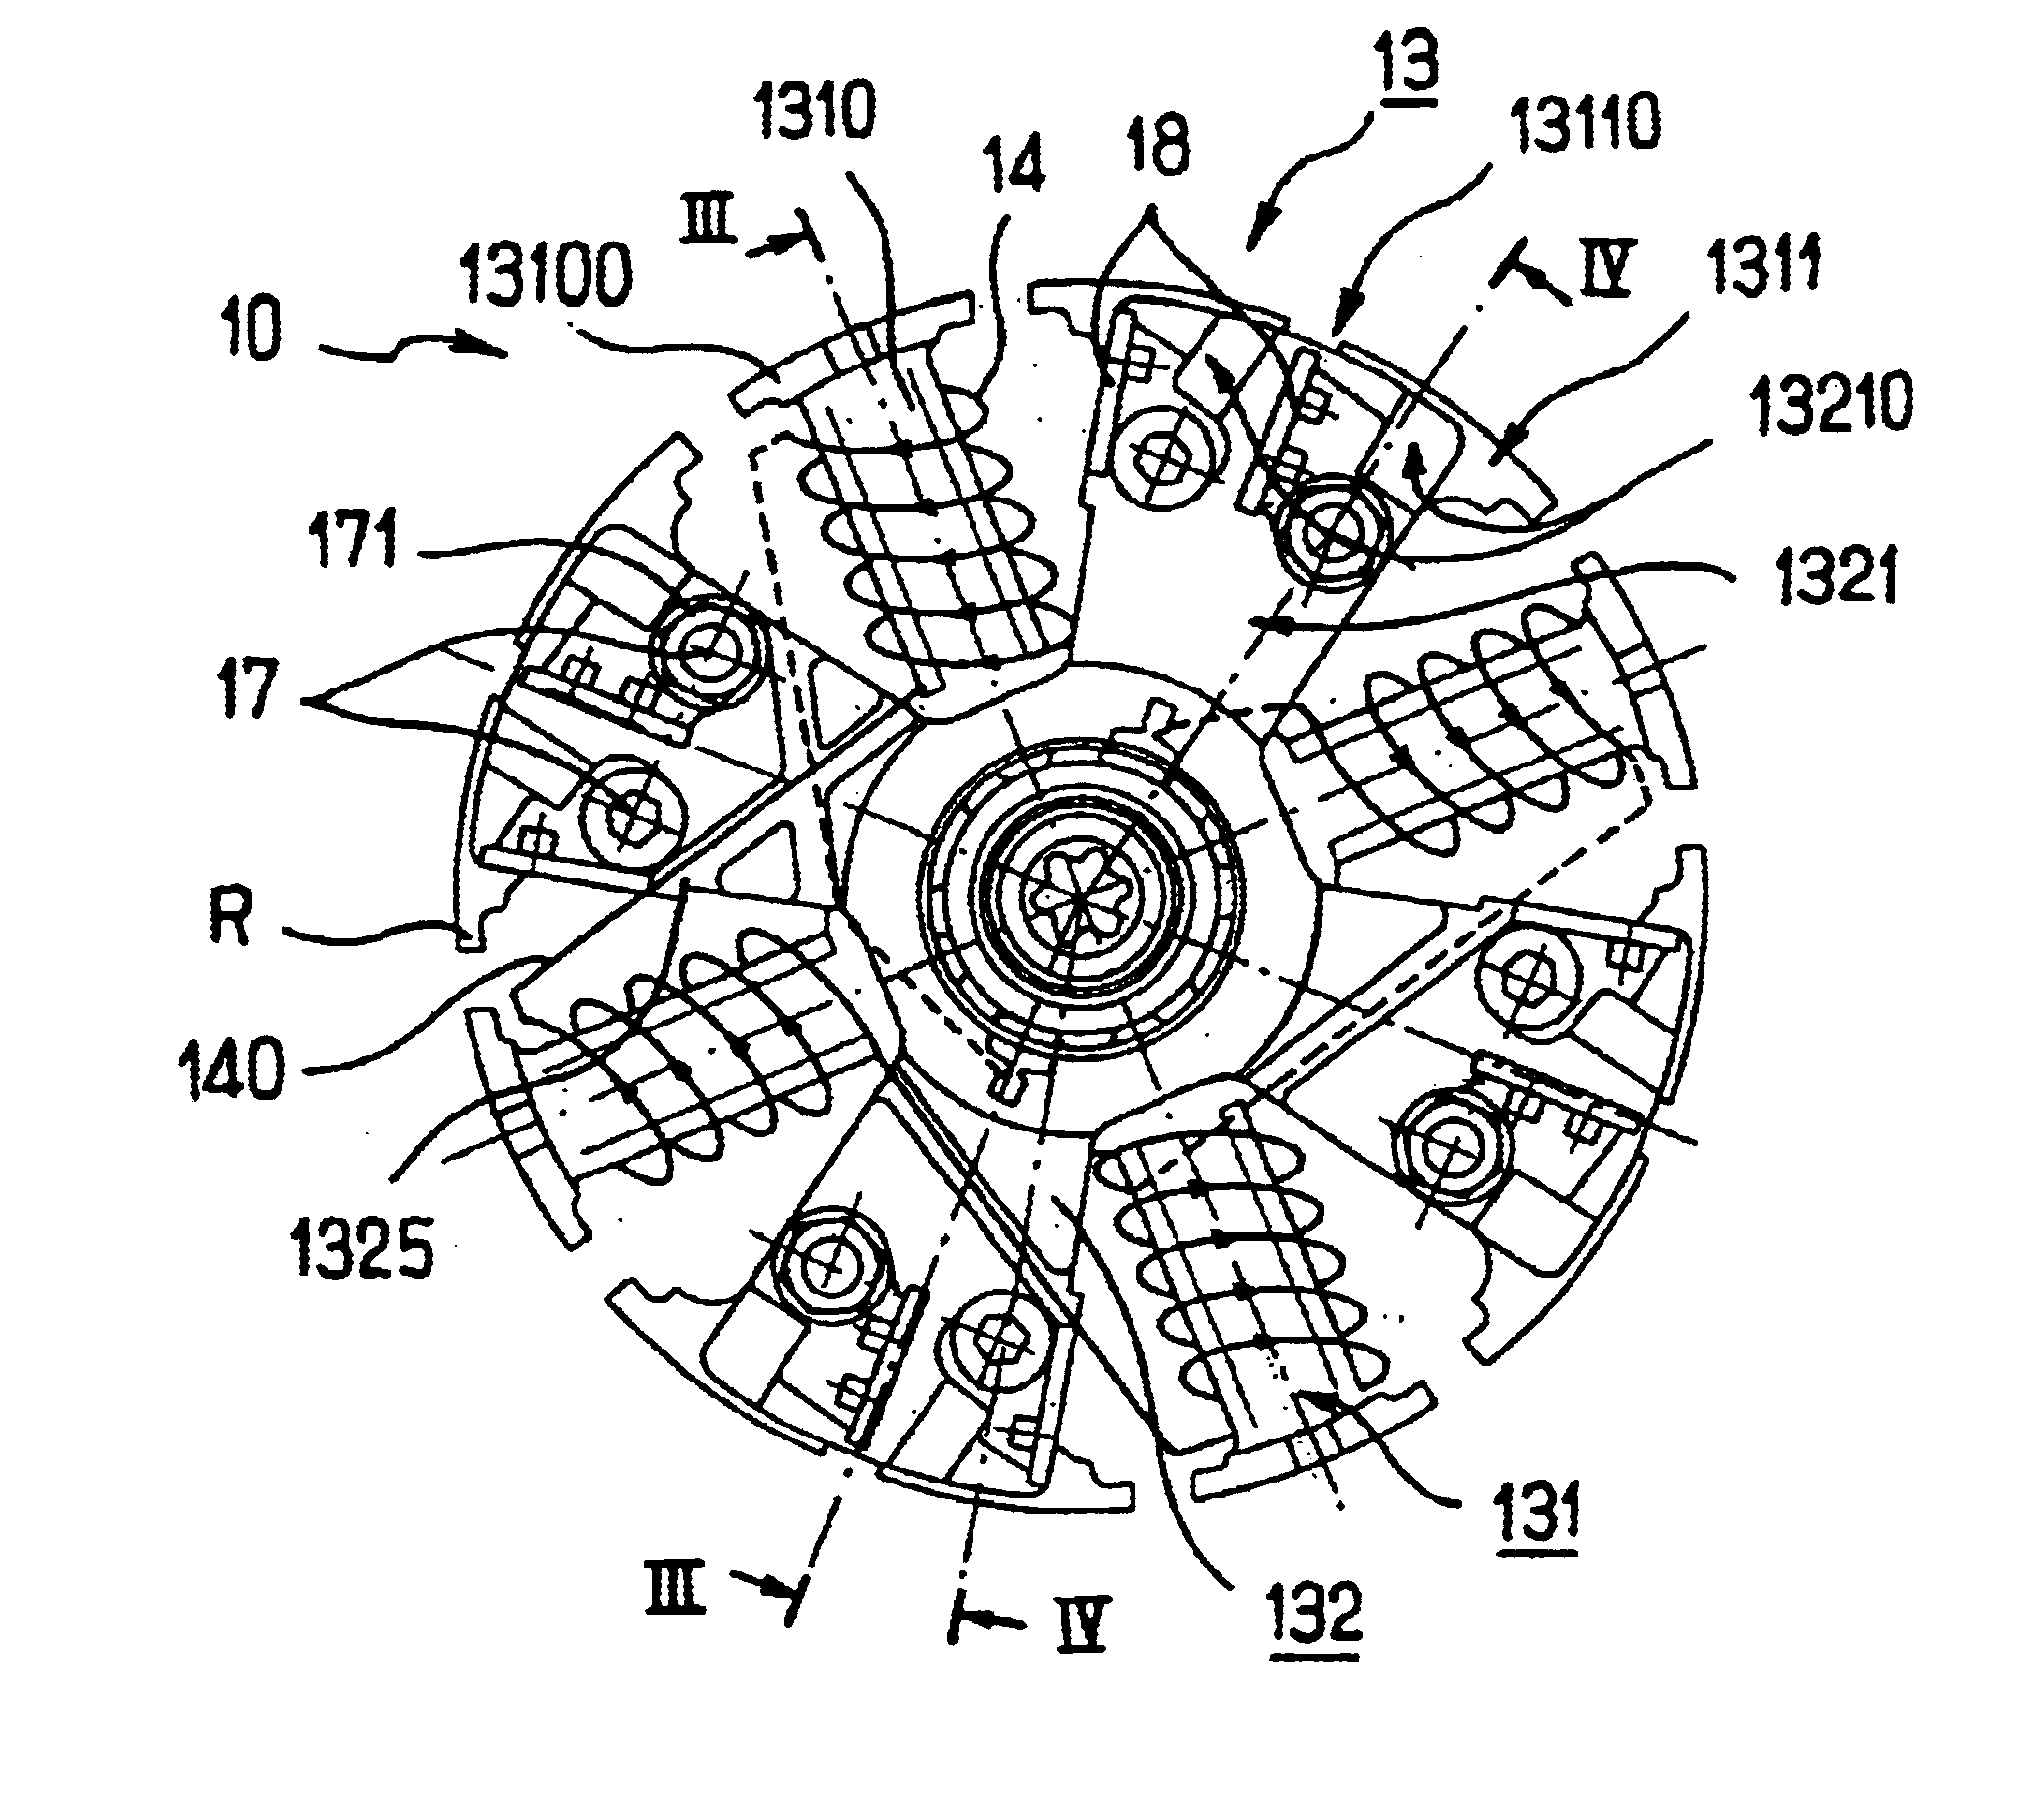 Hybrid alternator with an axial end retainer for permanent magnets